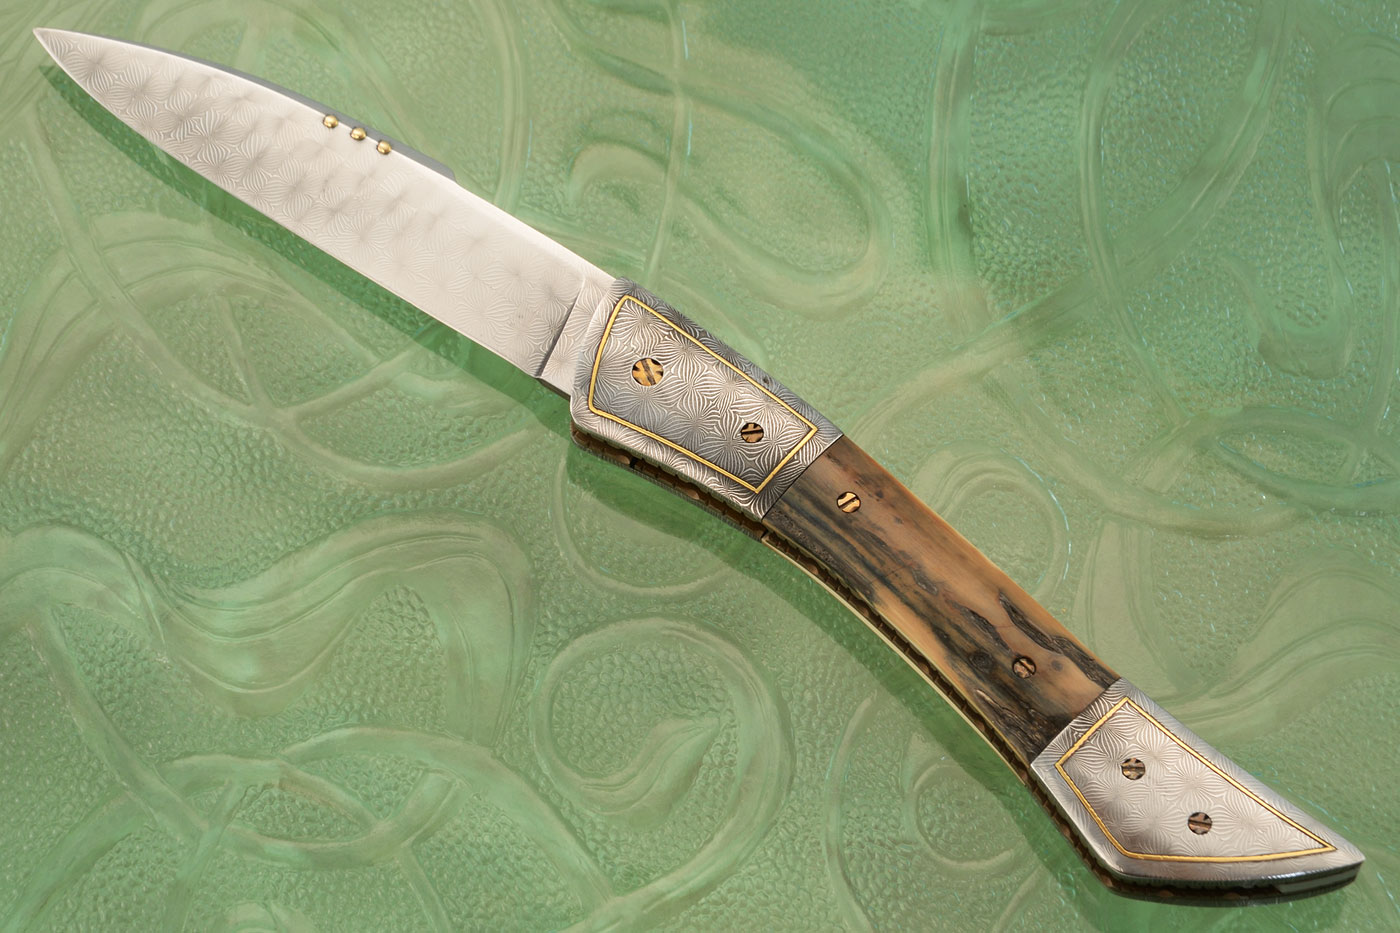 Mosaic Damascus Folder with Mammoth Ivory<br><i>Best in Show</i> and <i>Best Folder</i> - 8th Annual Idaho Traditional and Tactical Knife Show